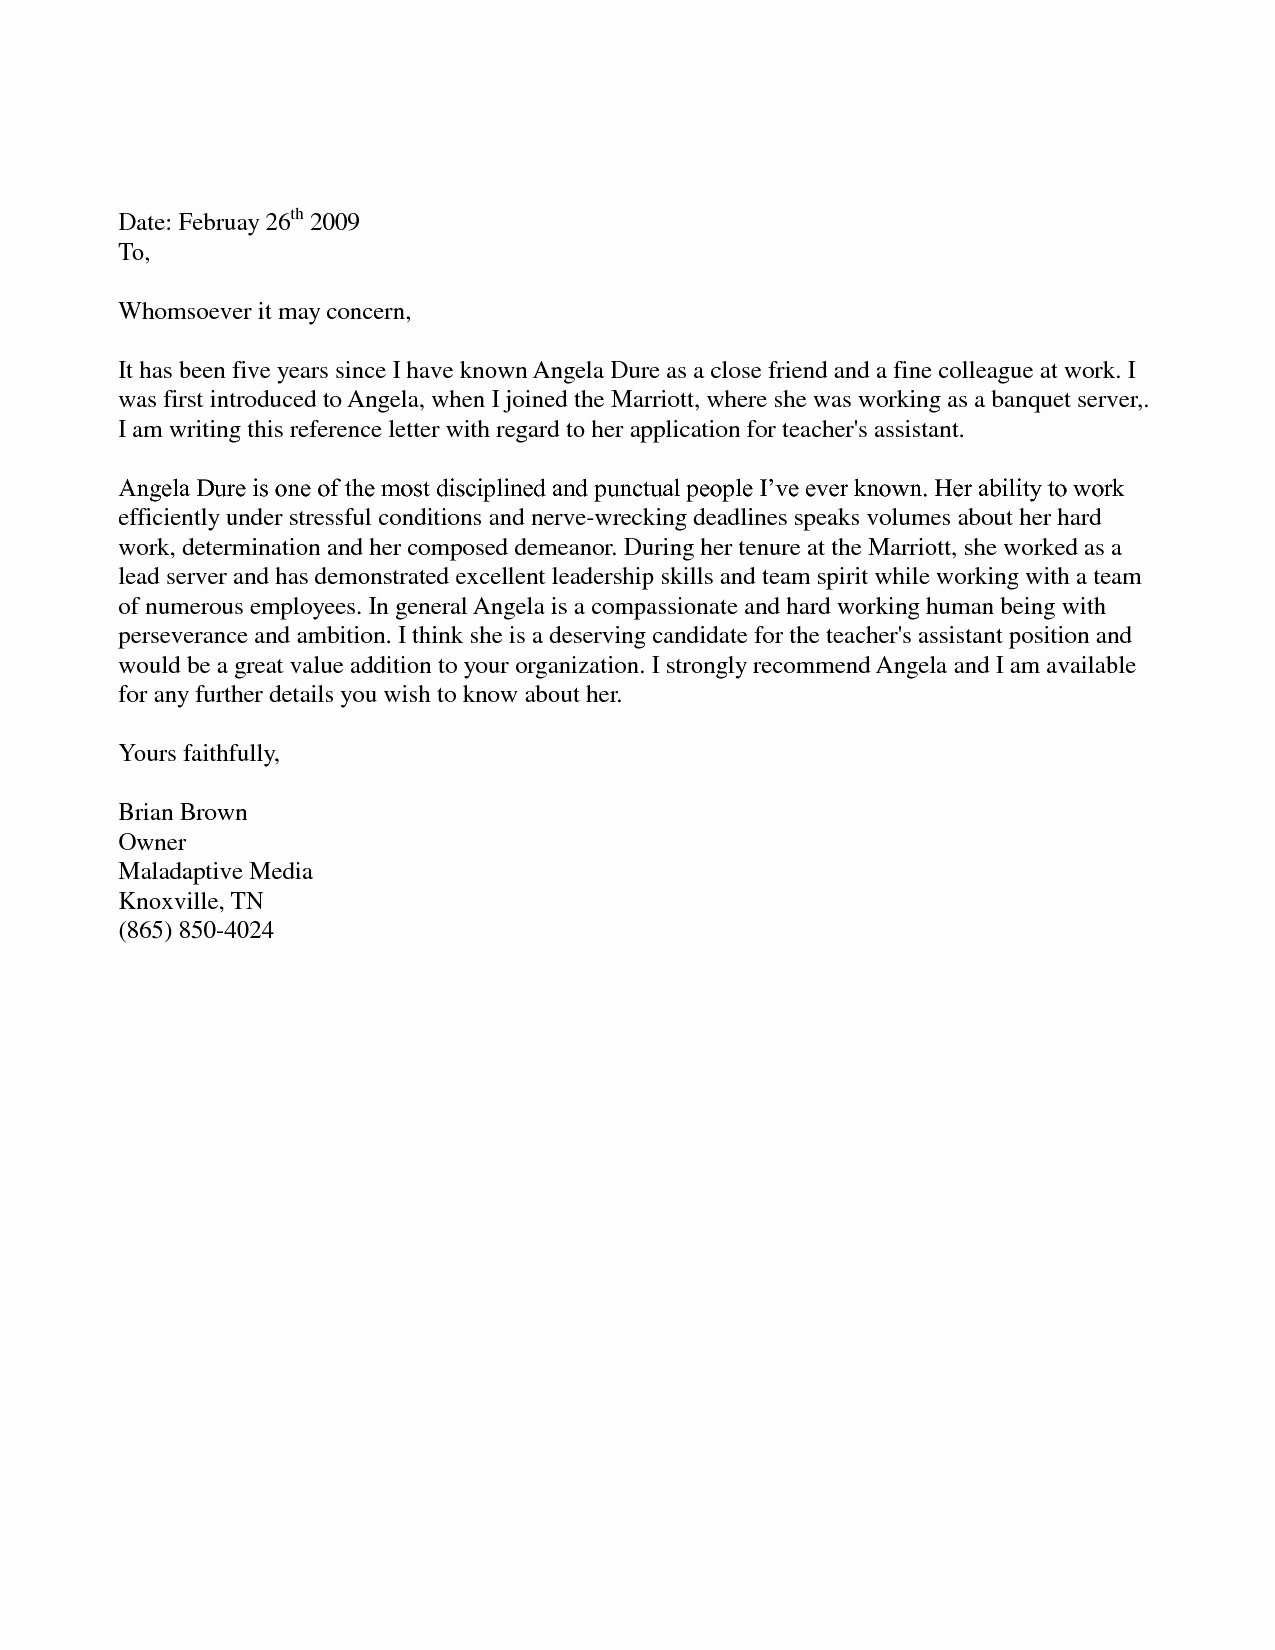 Sample Of A Reference Letter Beautiful Sample Letter Re Mendation for A Friend